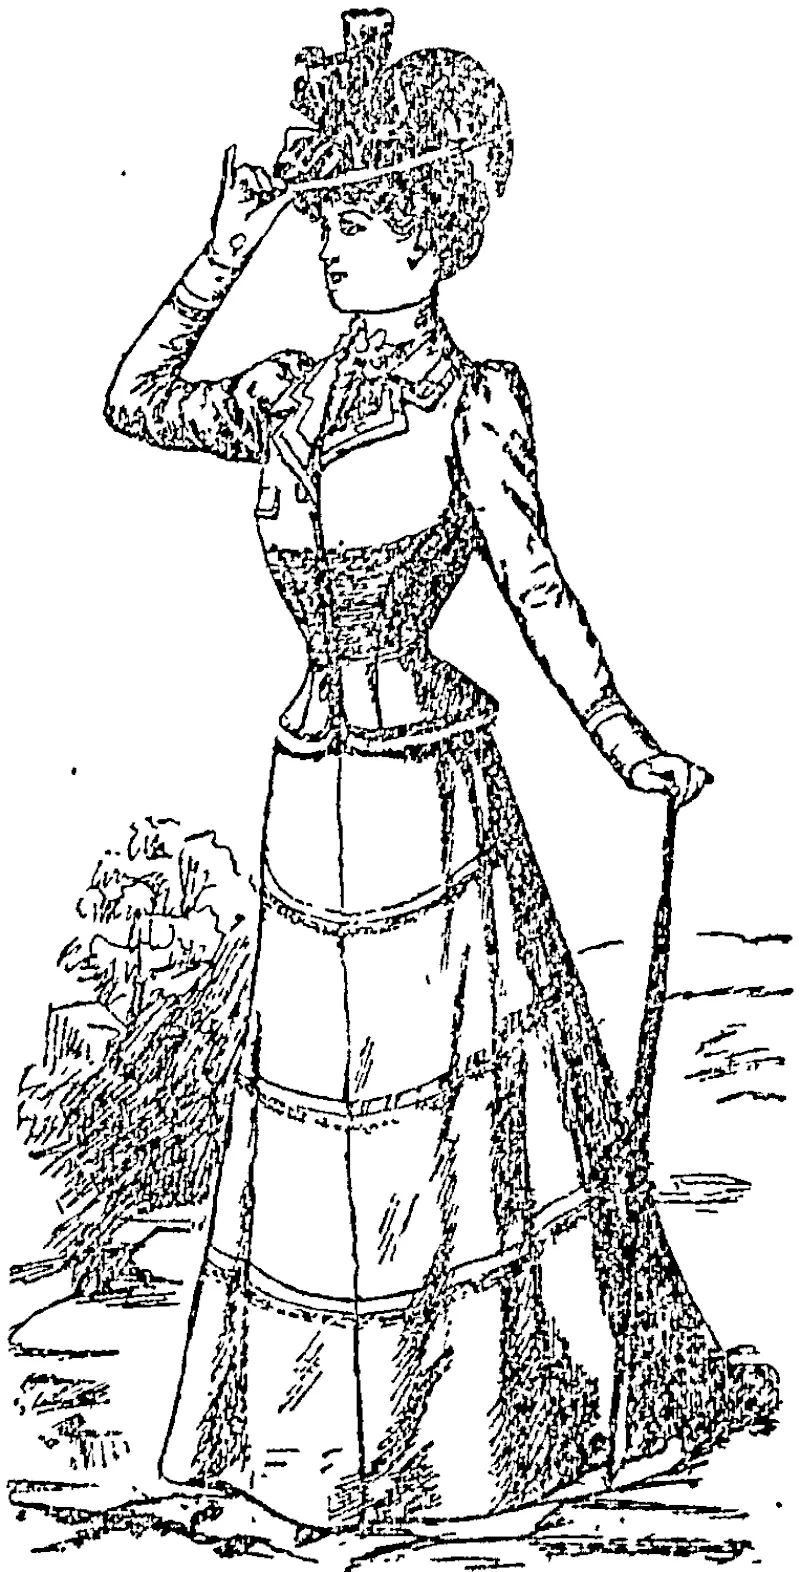 COSTUME IN DYED LINEN. By Redfern. (Auckland Star, 31 December 1898)